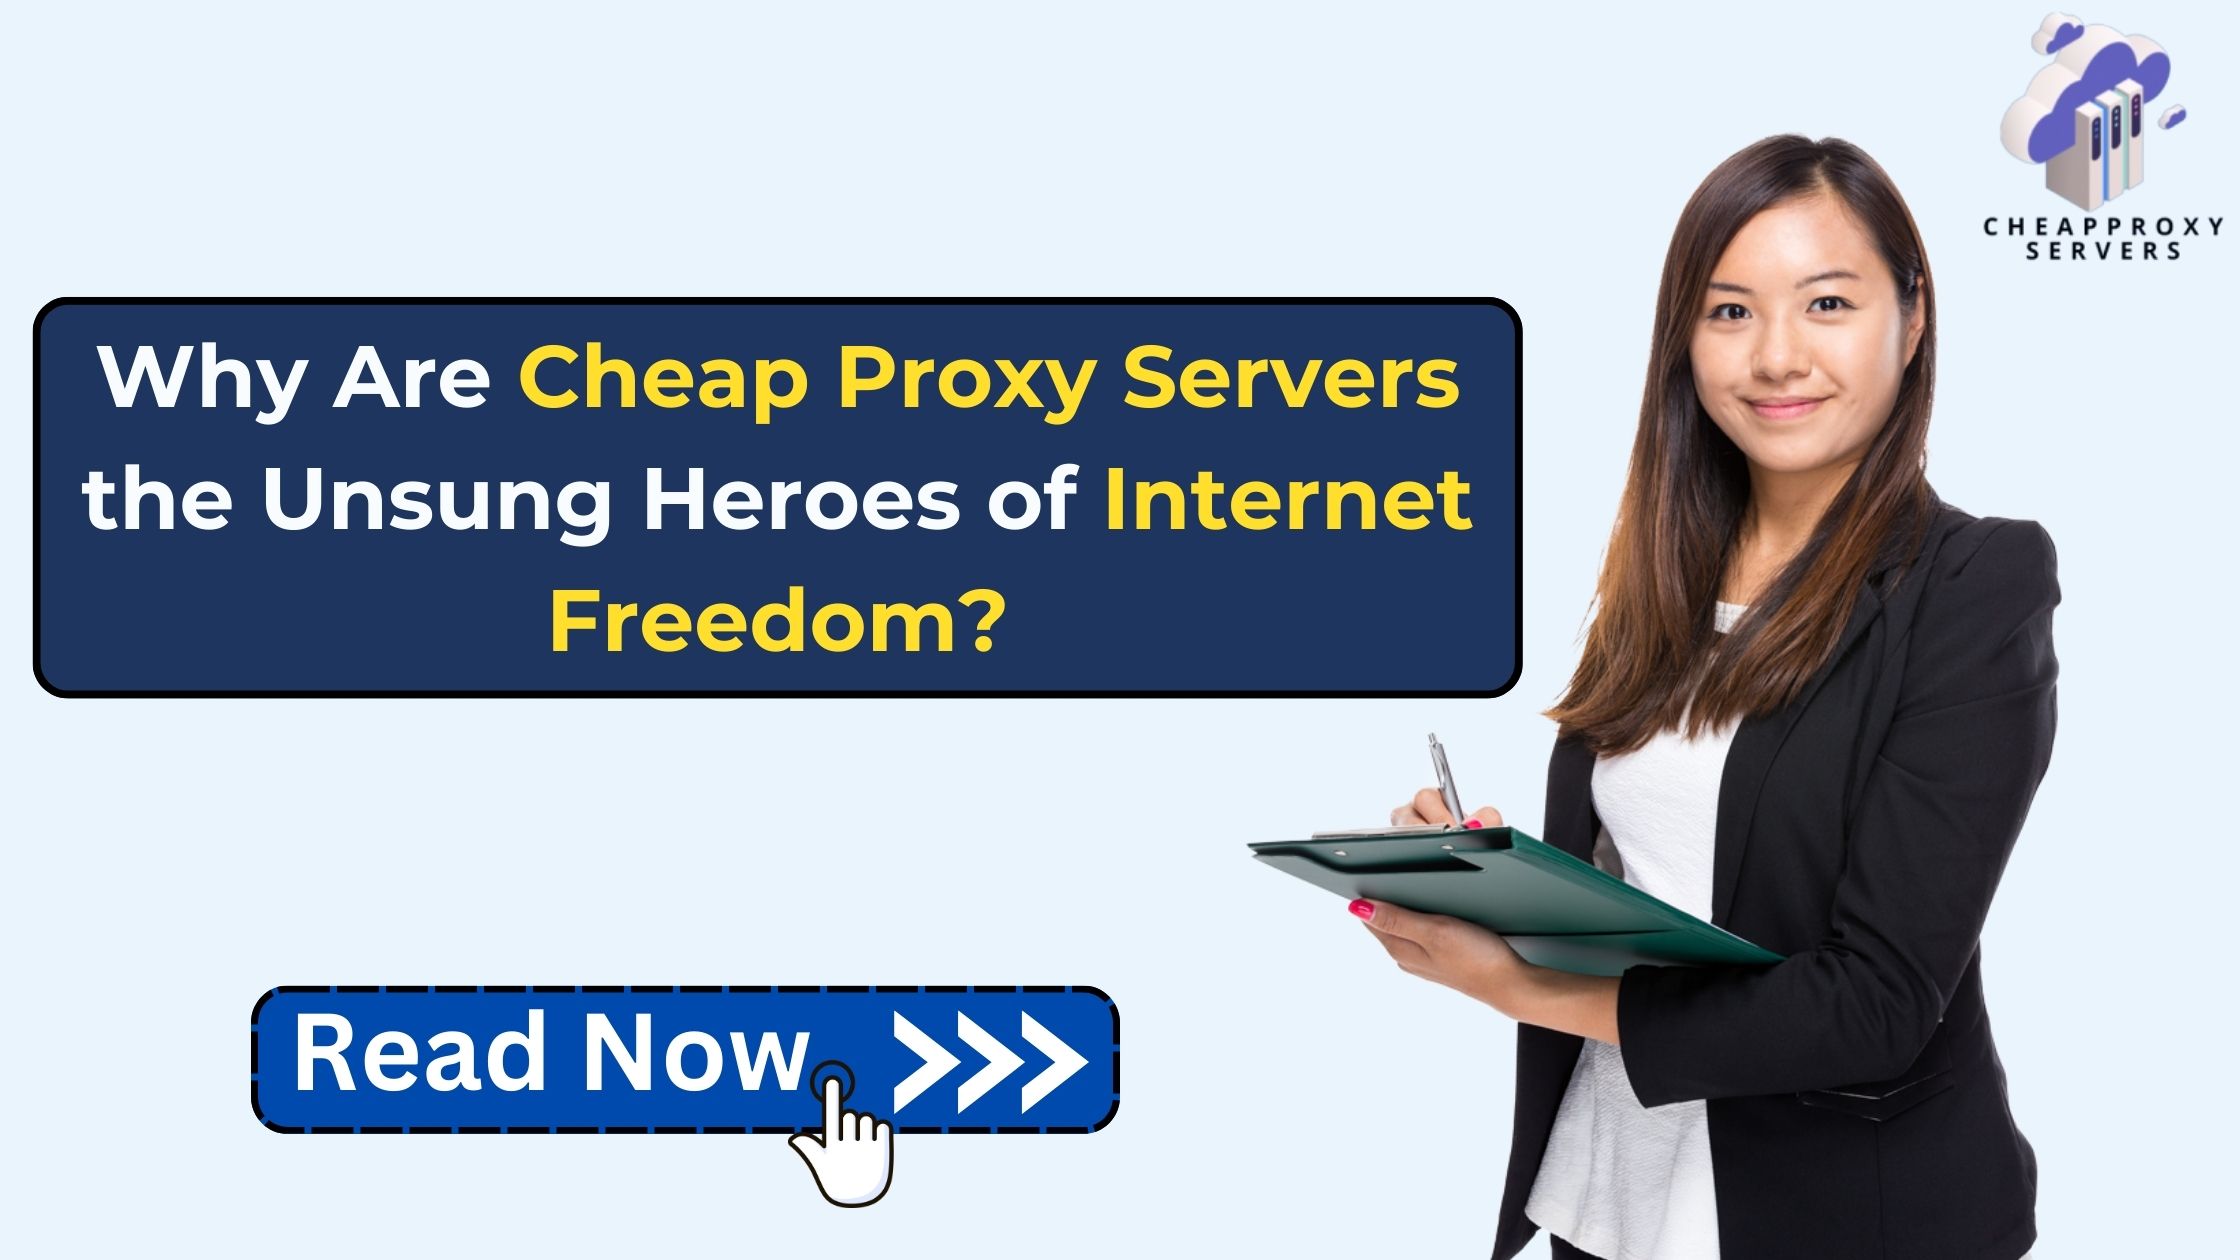 Why Are Cheap Proxy Servers the Unsung Heroes of Internet Freedom?